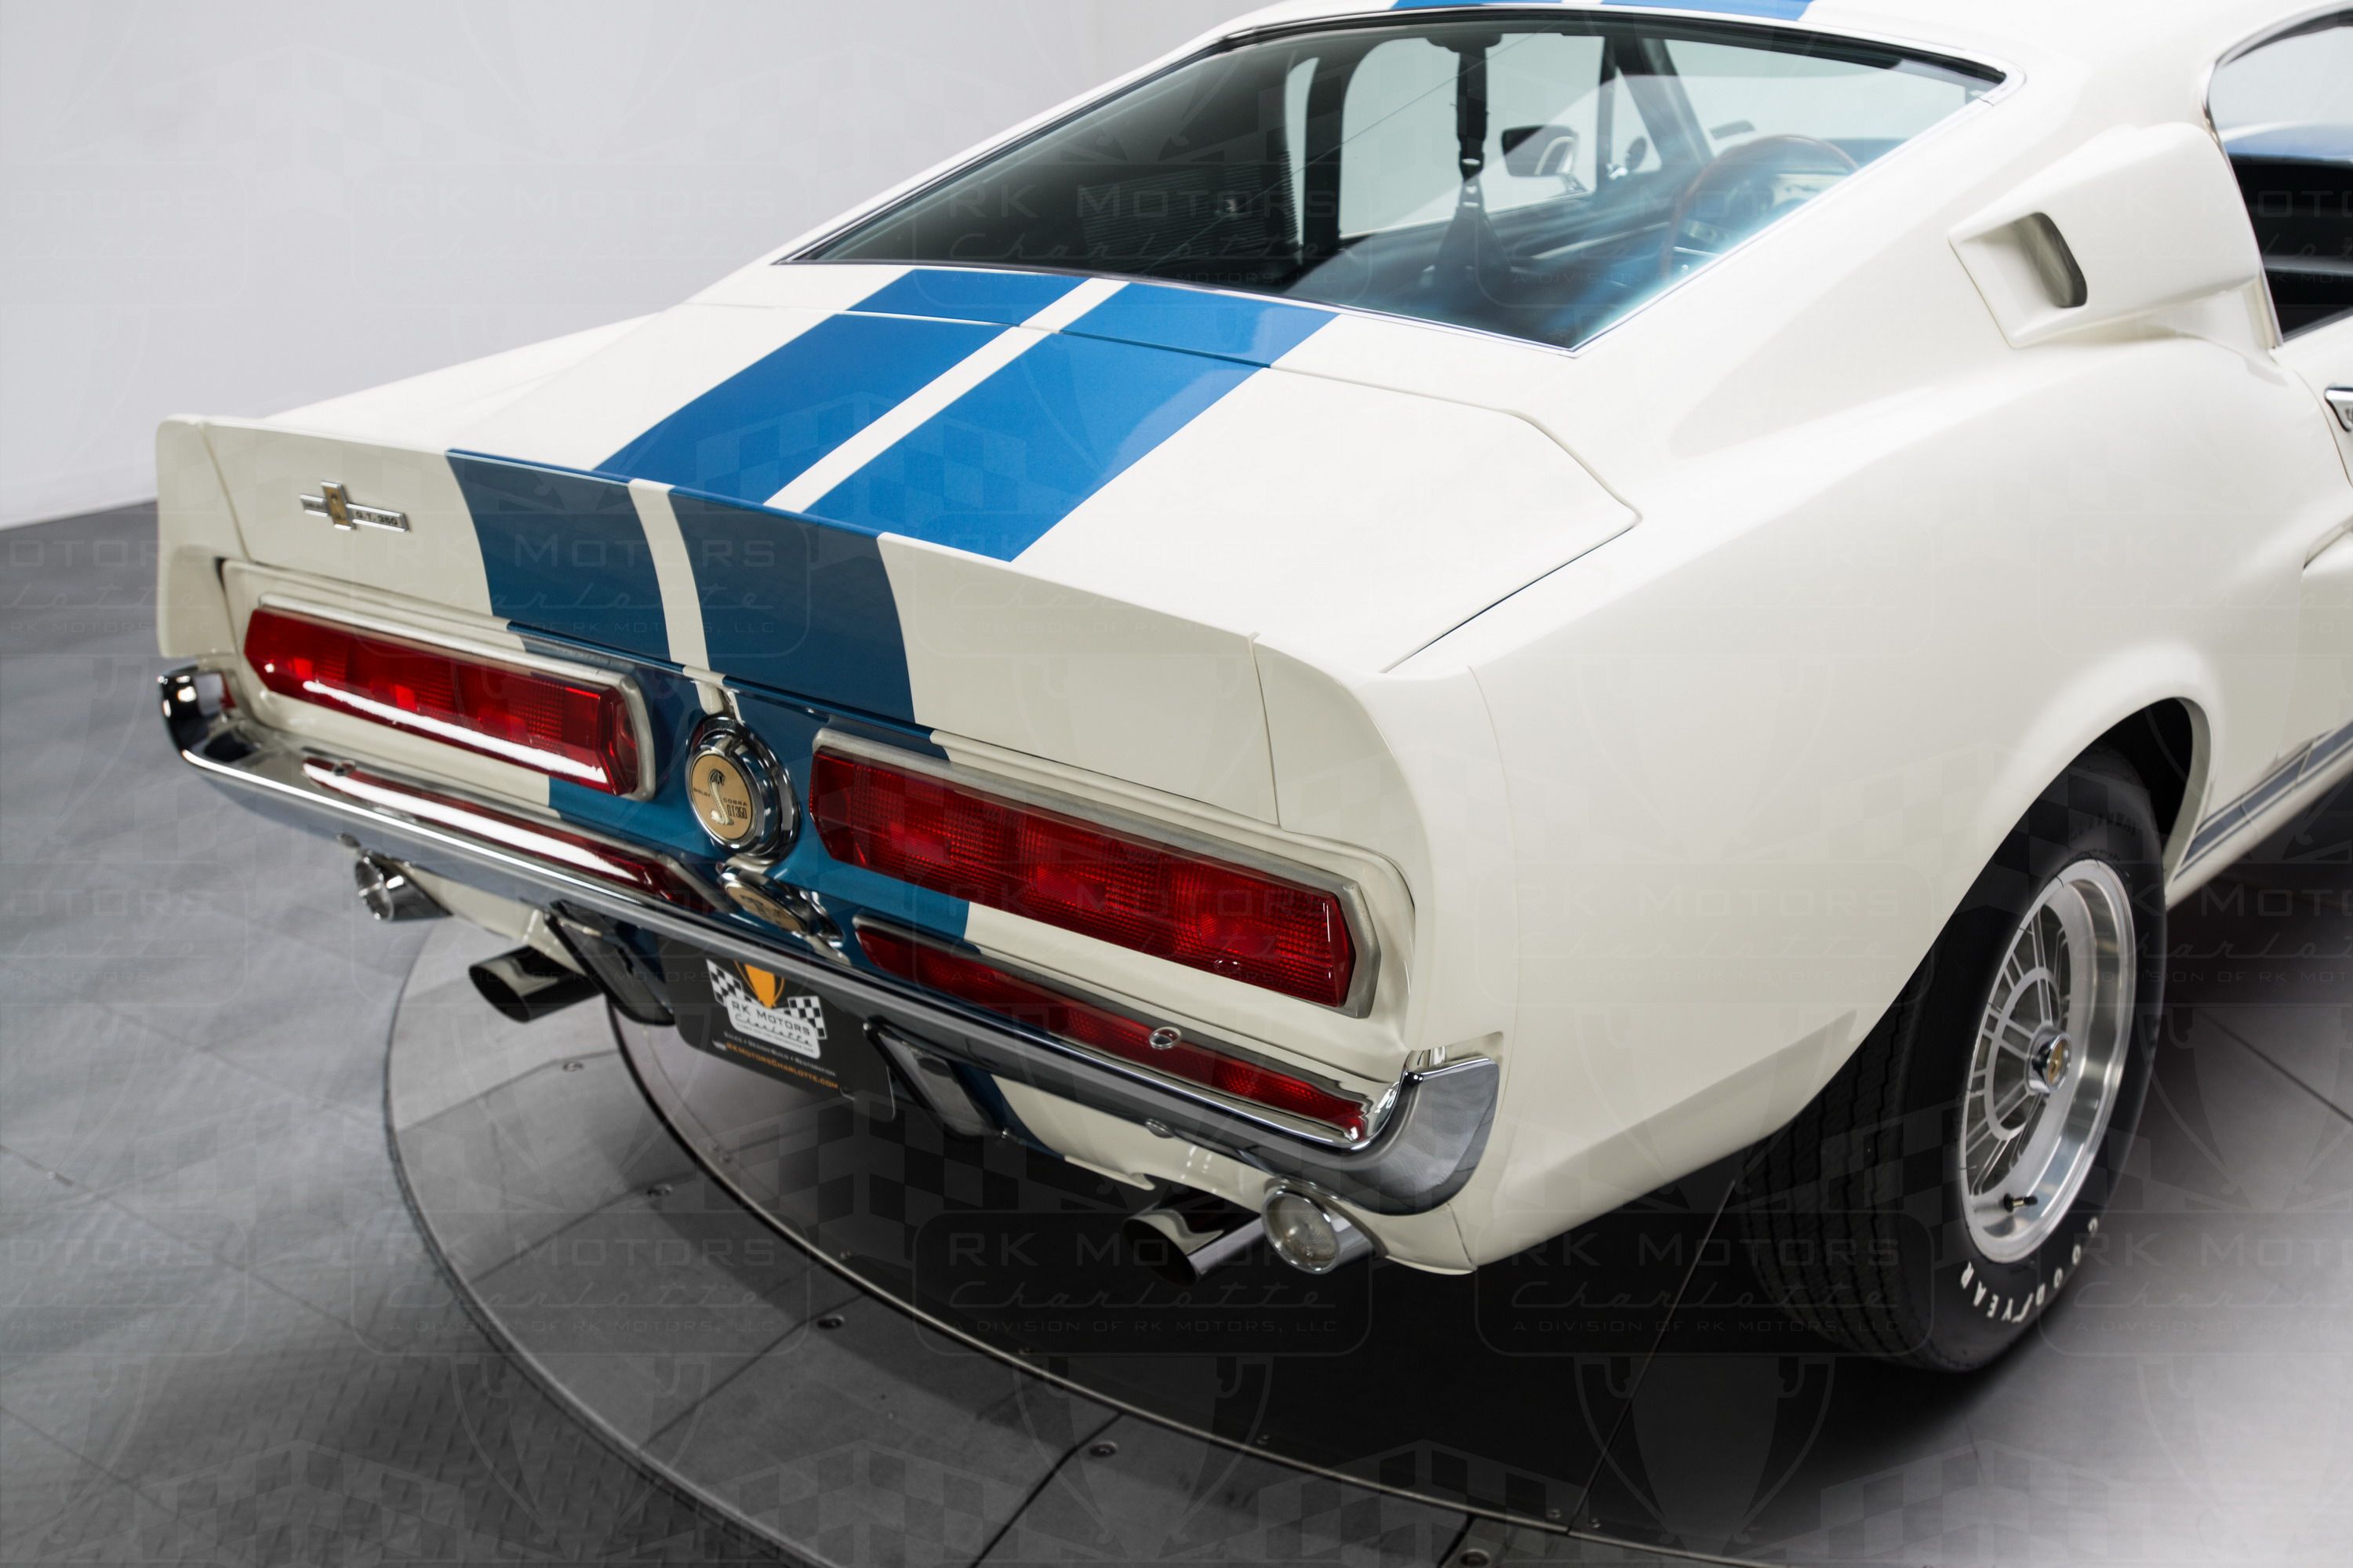 1967 Ford Shelby Mustang GT350